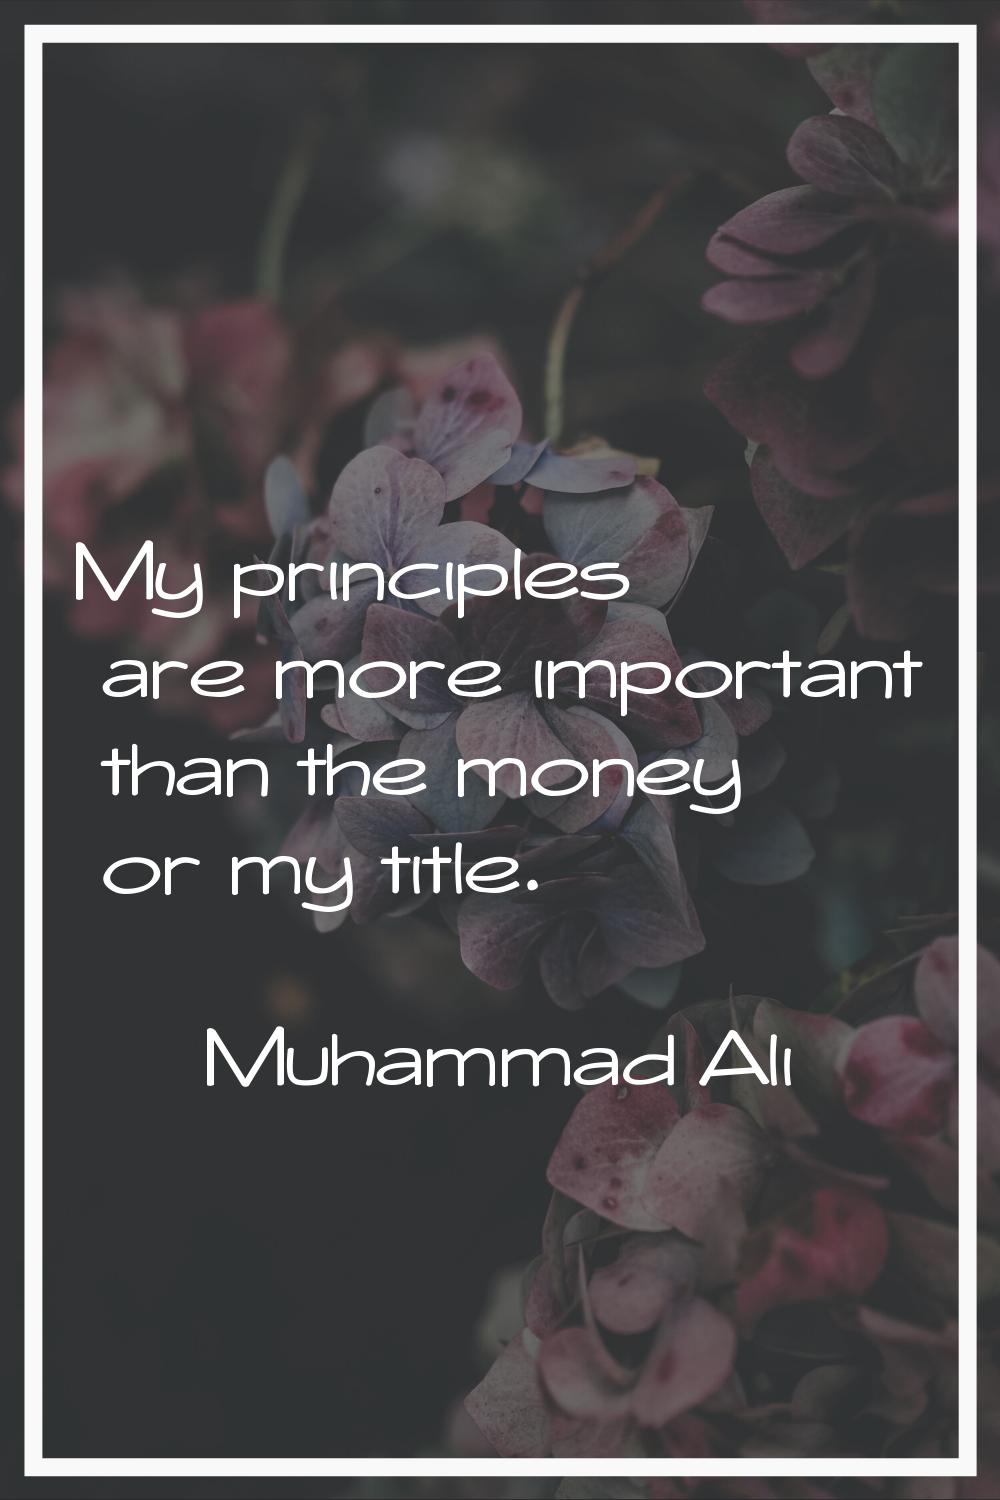 My principles are more important than the money or my title.